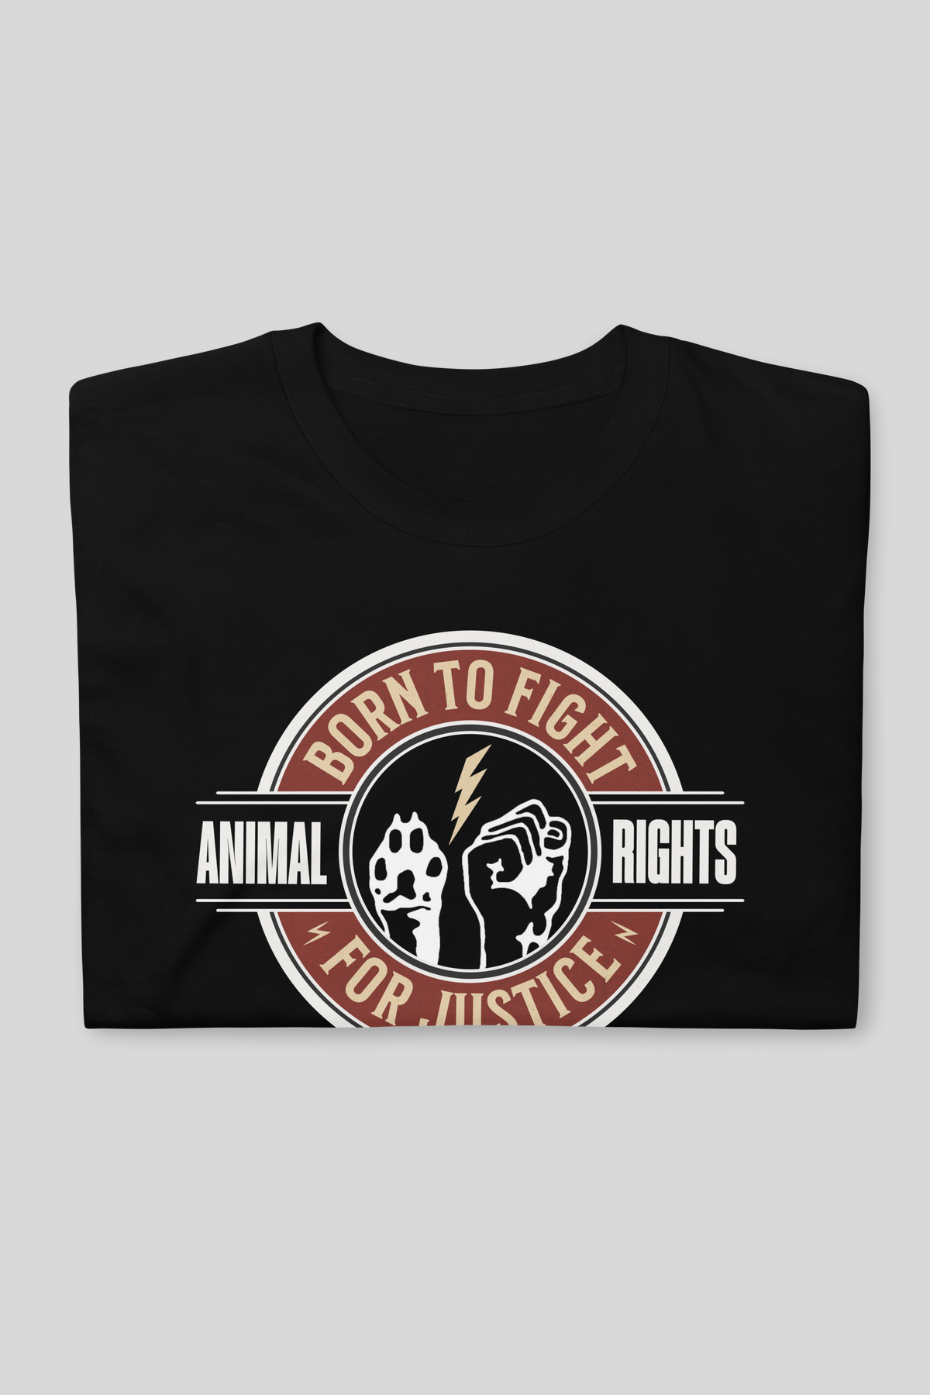 Born to Fight For Justice Unisex Basic Softstyle T-Shirt